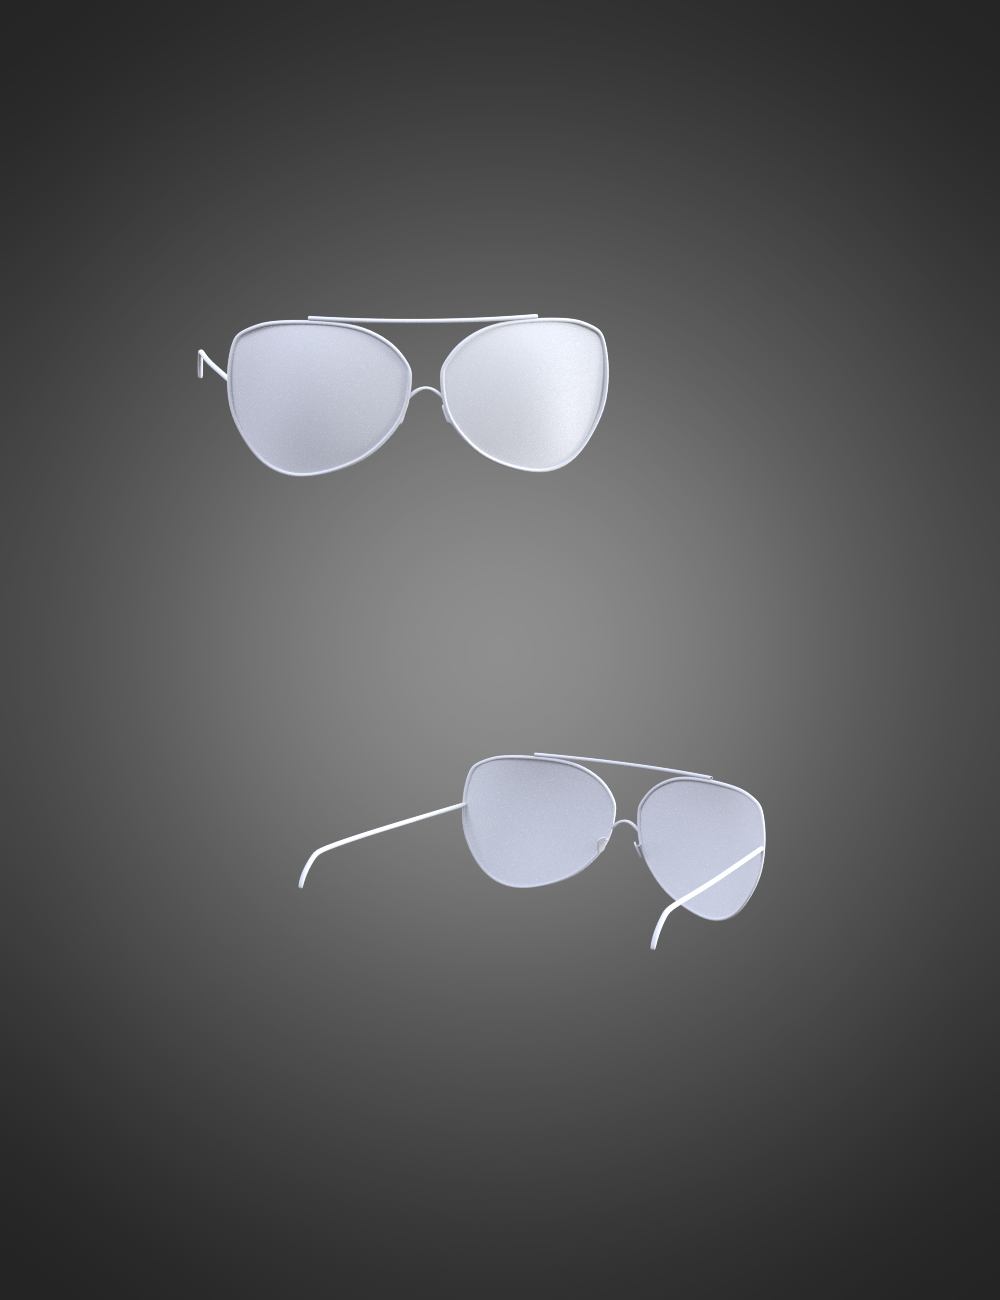 X-Fashion Color Cross Swimsuit Sunglasses for Genesis 8 and 8.1 Females